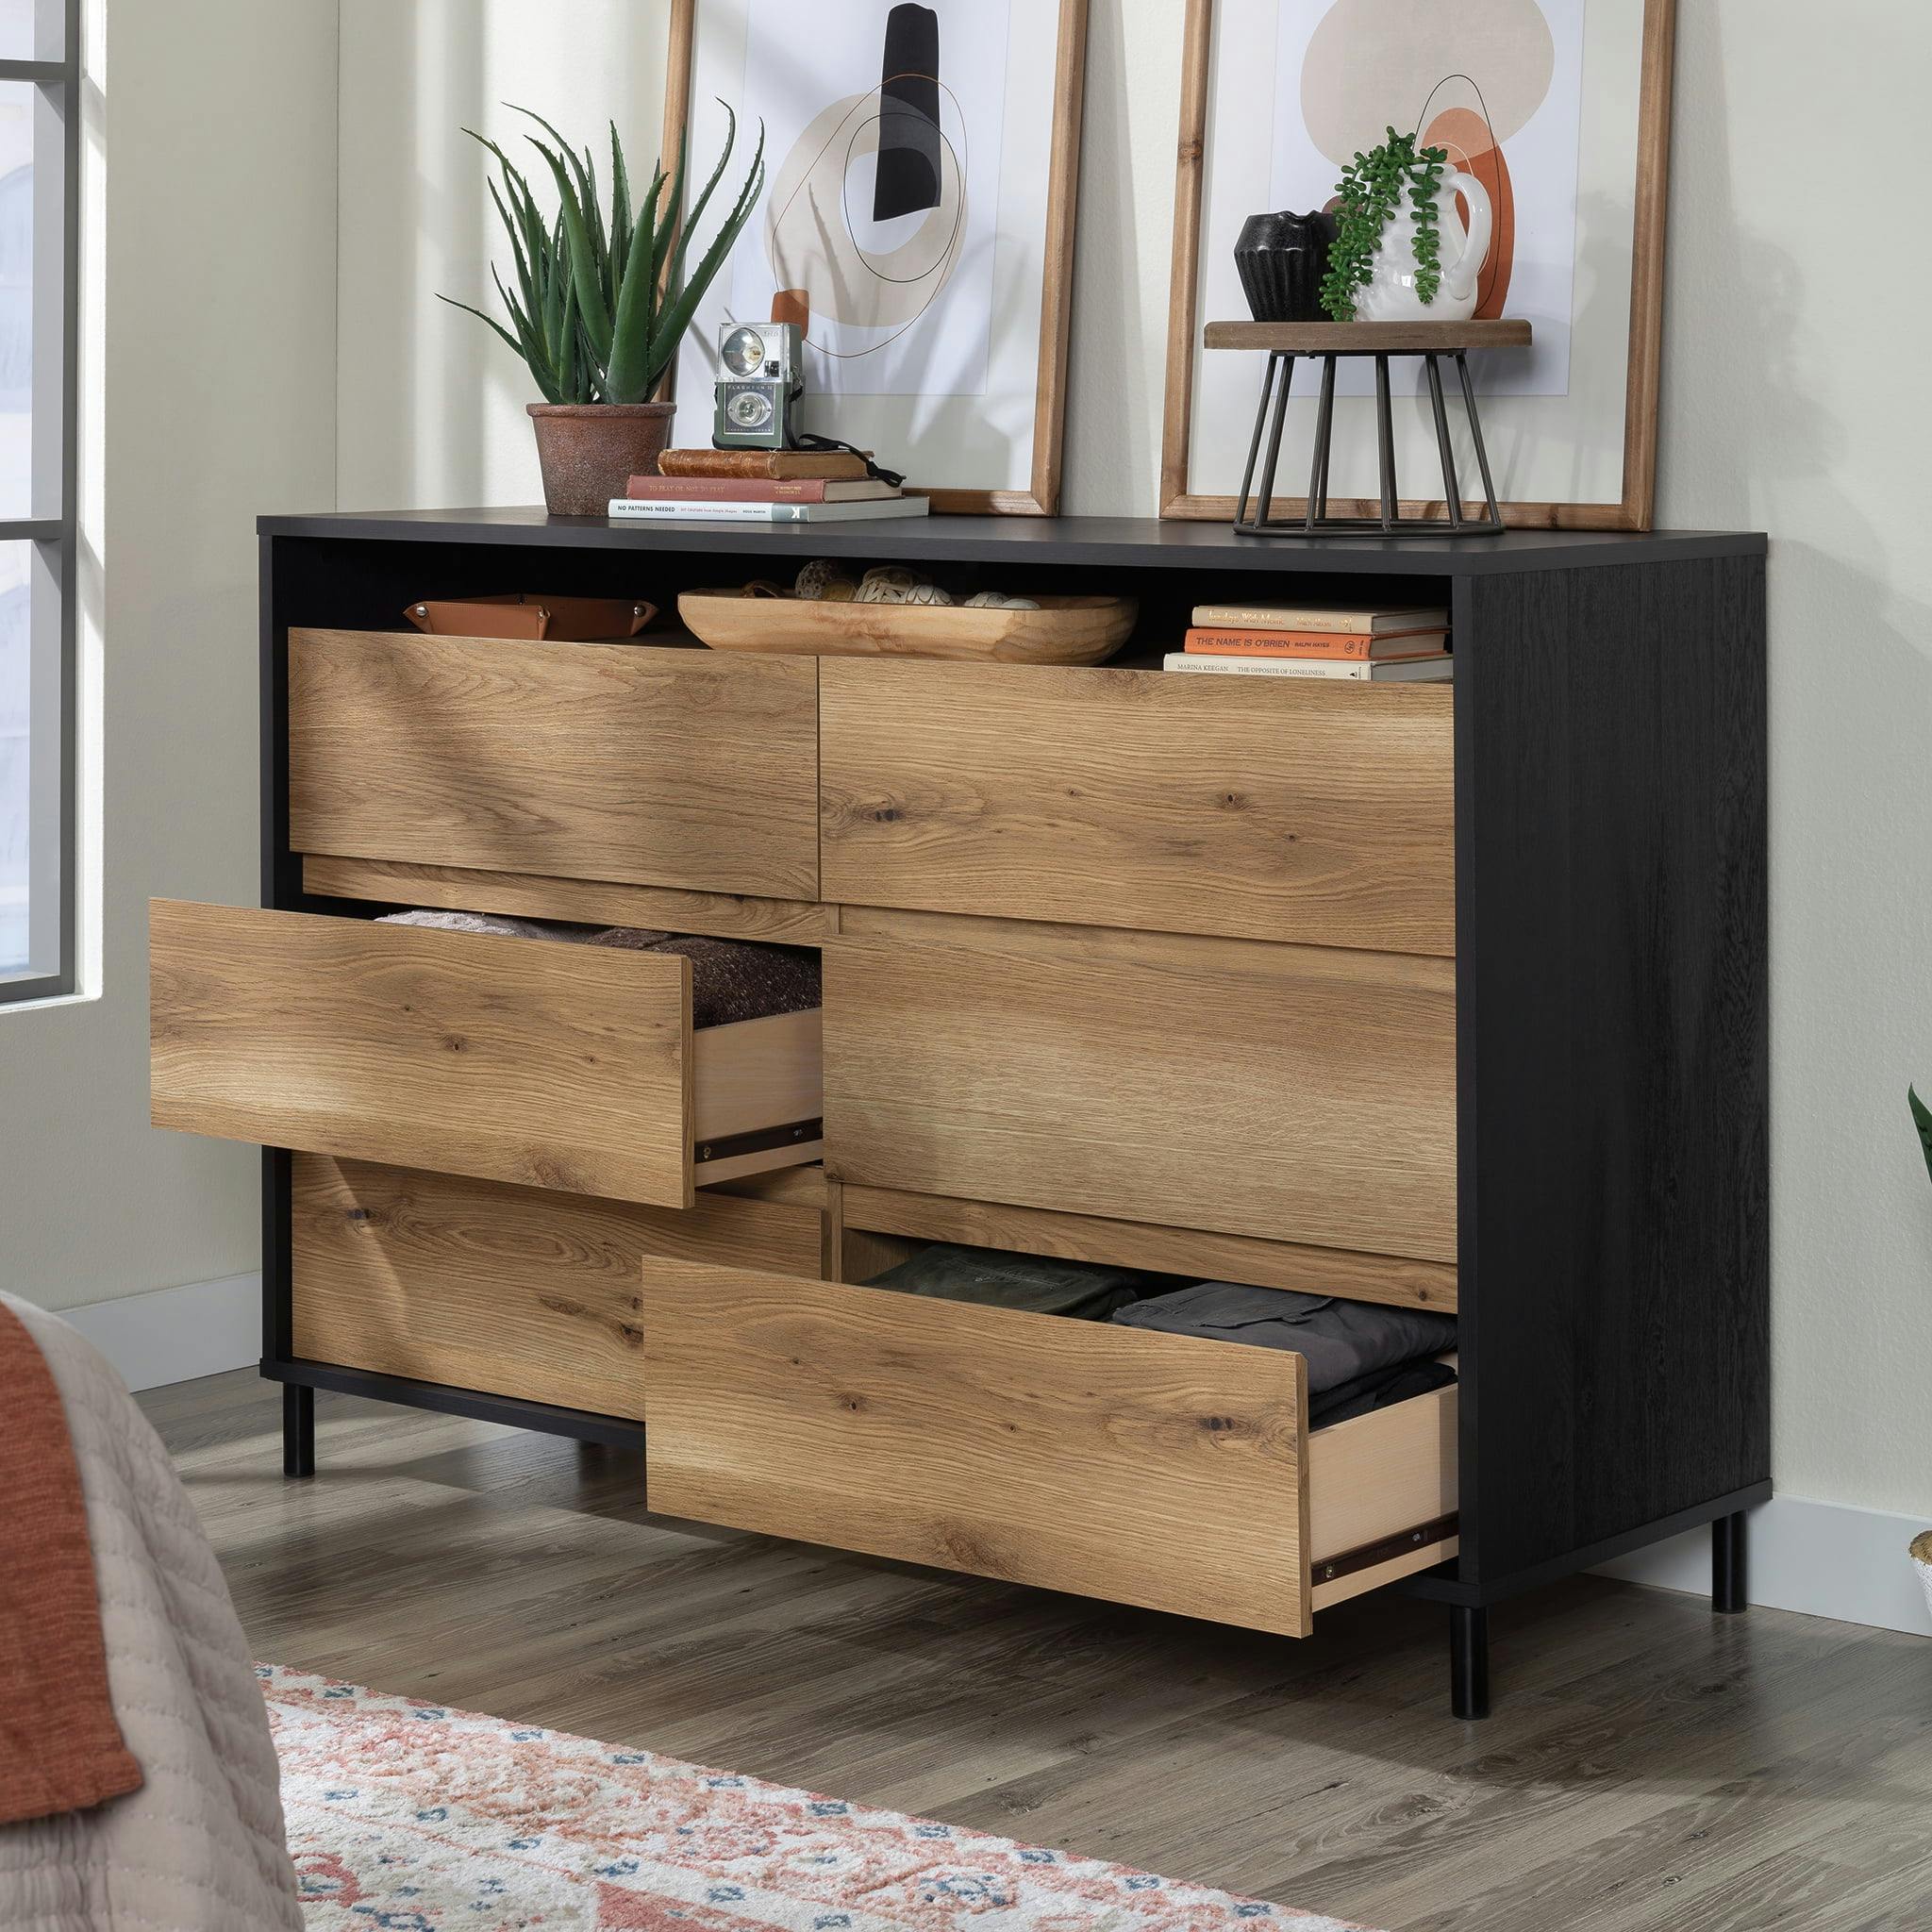 Raven Oak and Timber 6-Drawer Modern Dresser with Metal Accents